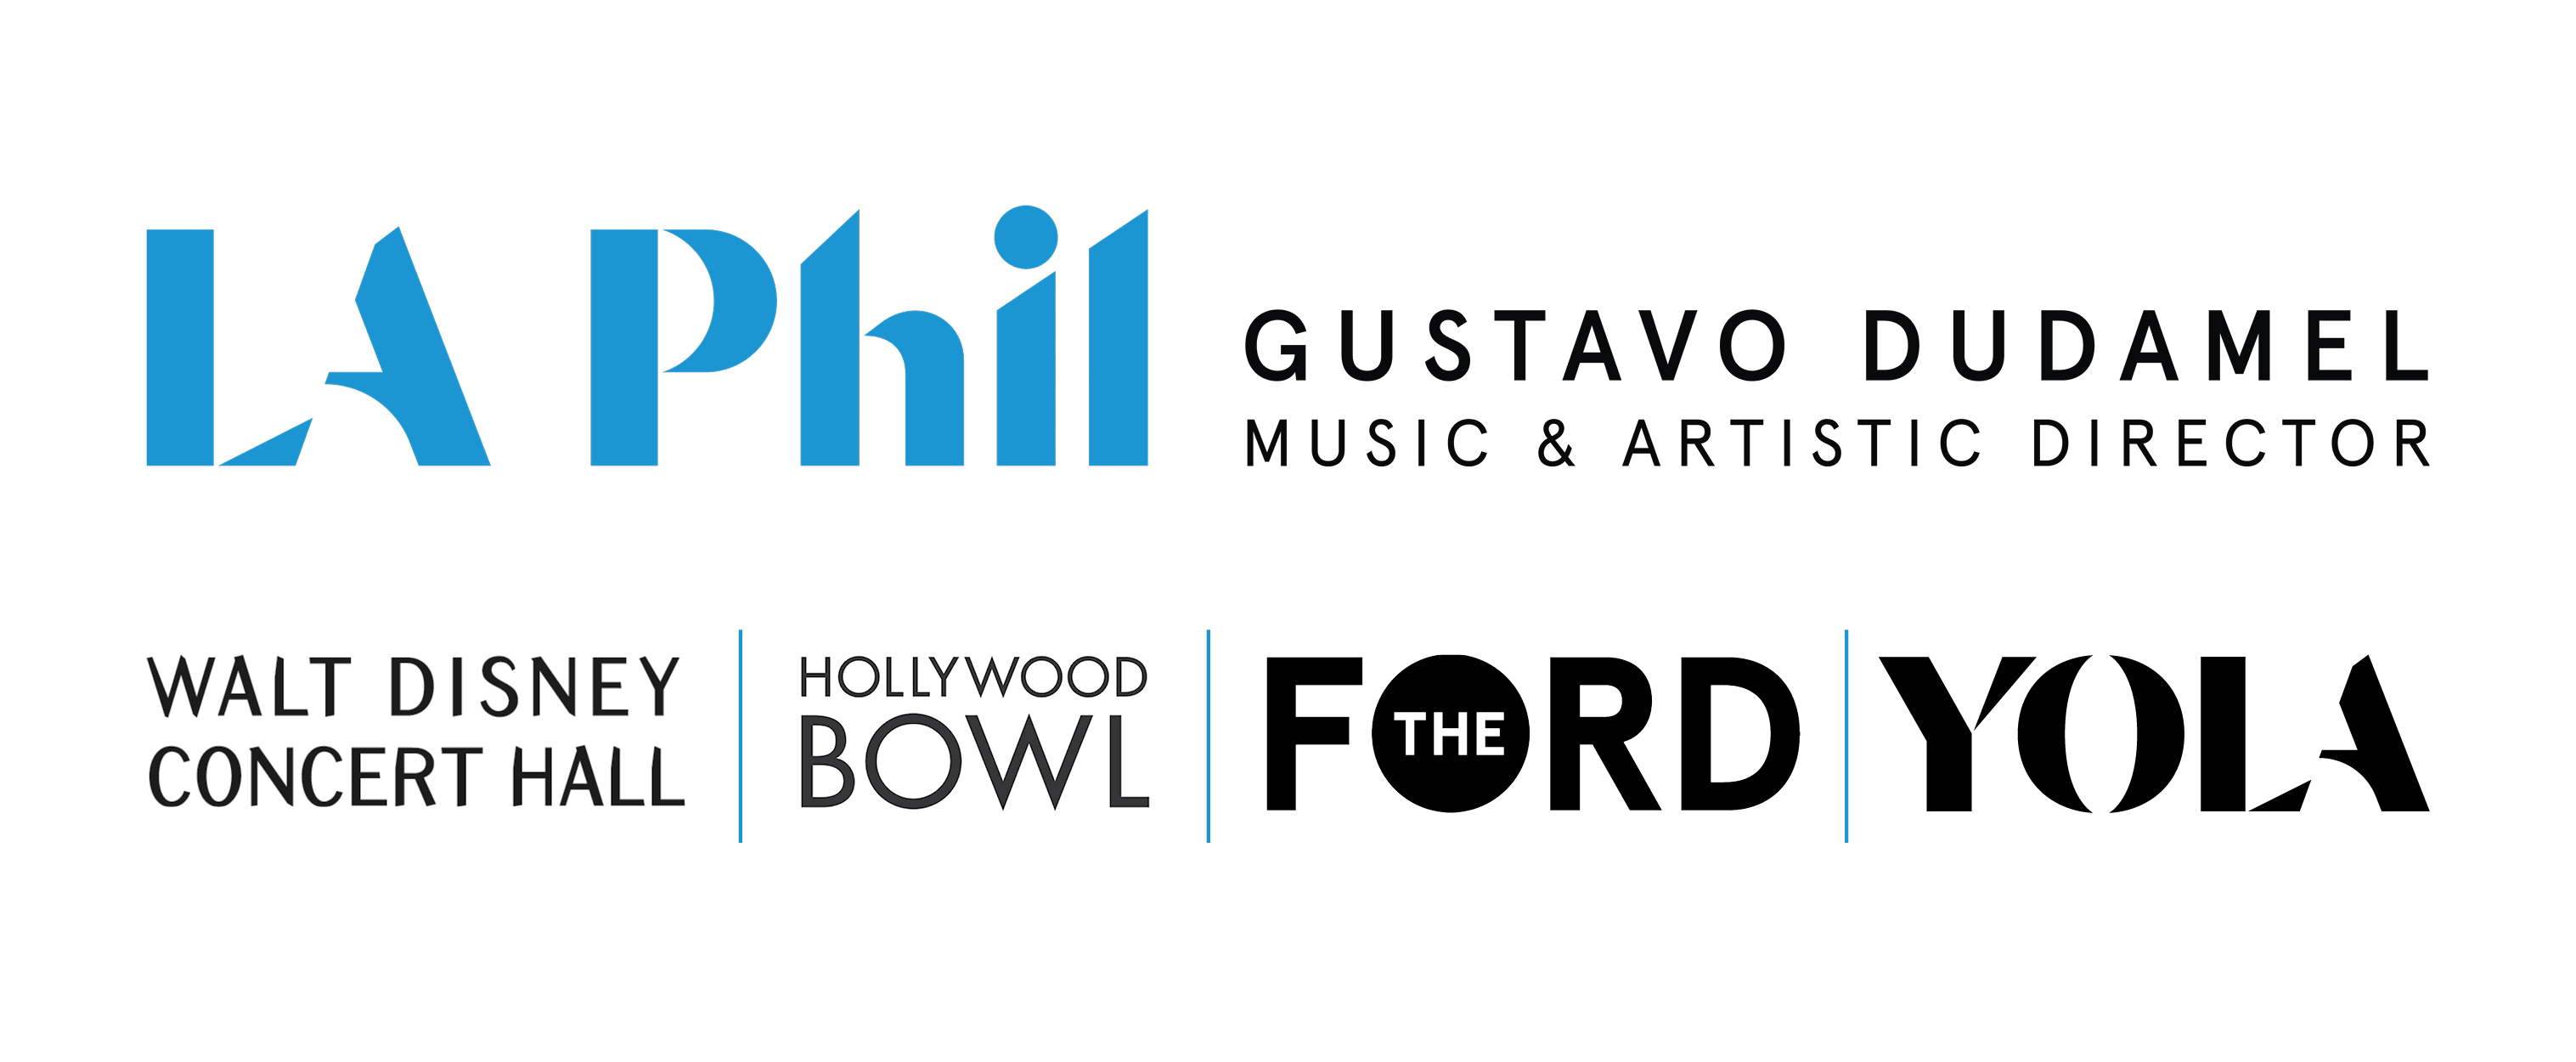 Logos of the LA Phil, Walt Disney Concert Hall, Hollywood Bowl, The Ford, and YOLA